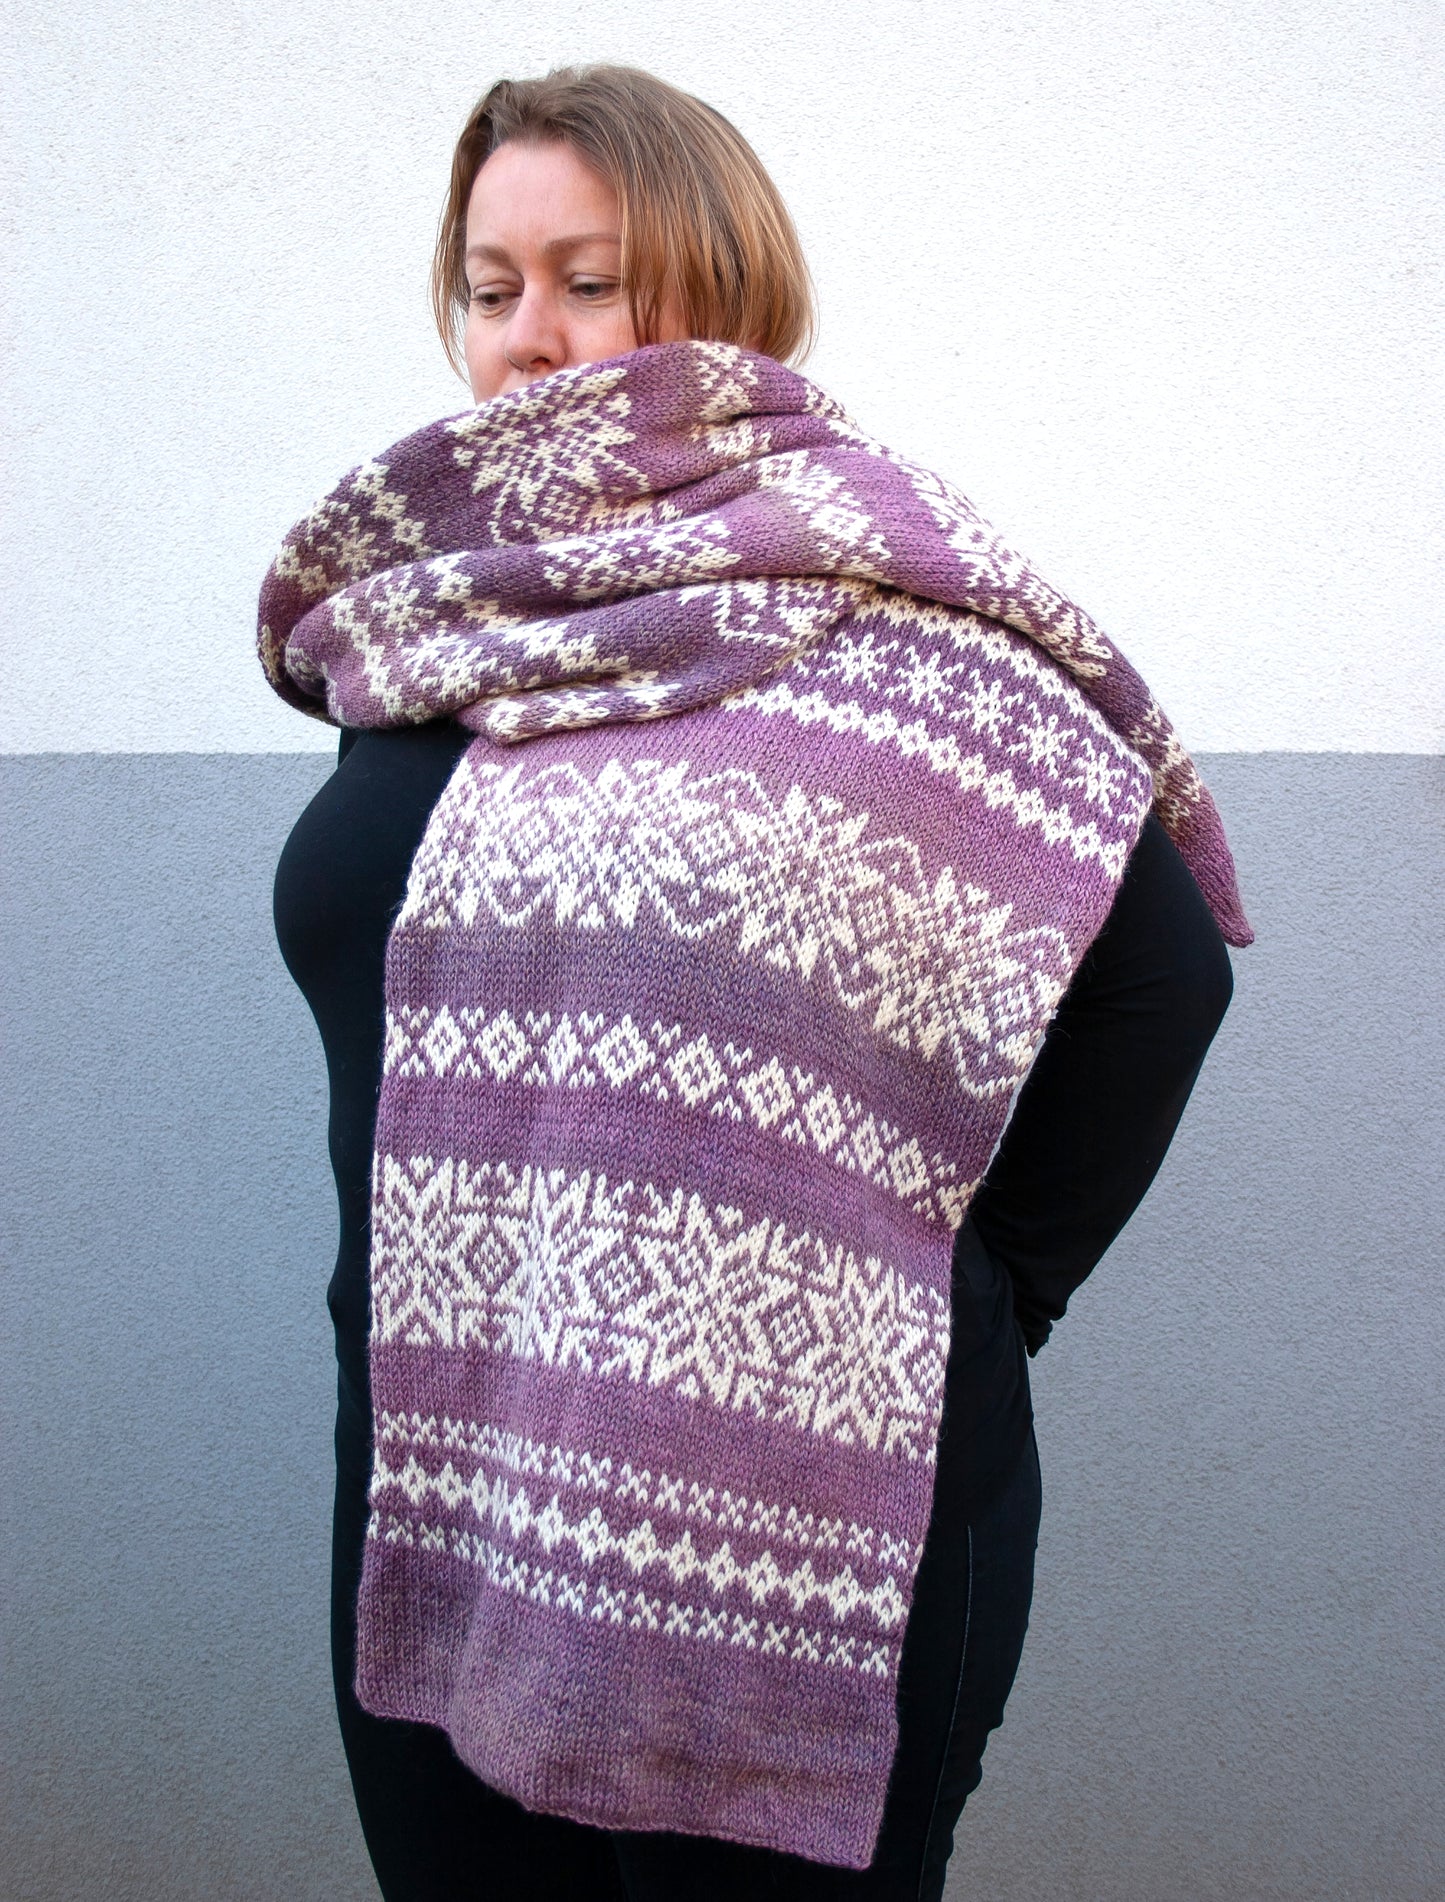 a woman performs long hand-knitted Fair Isle scarf made from gradient purple and white wool yarn